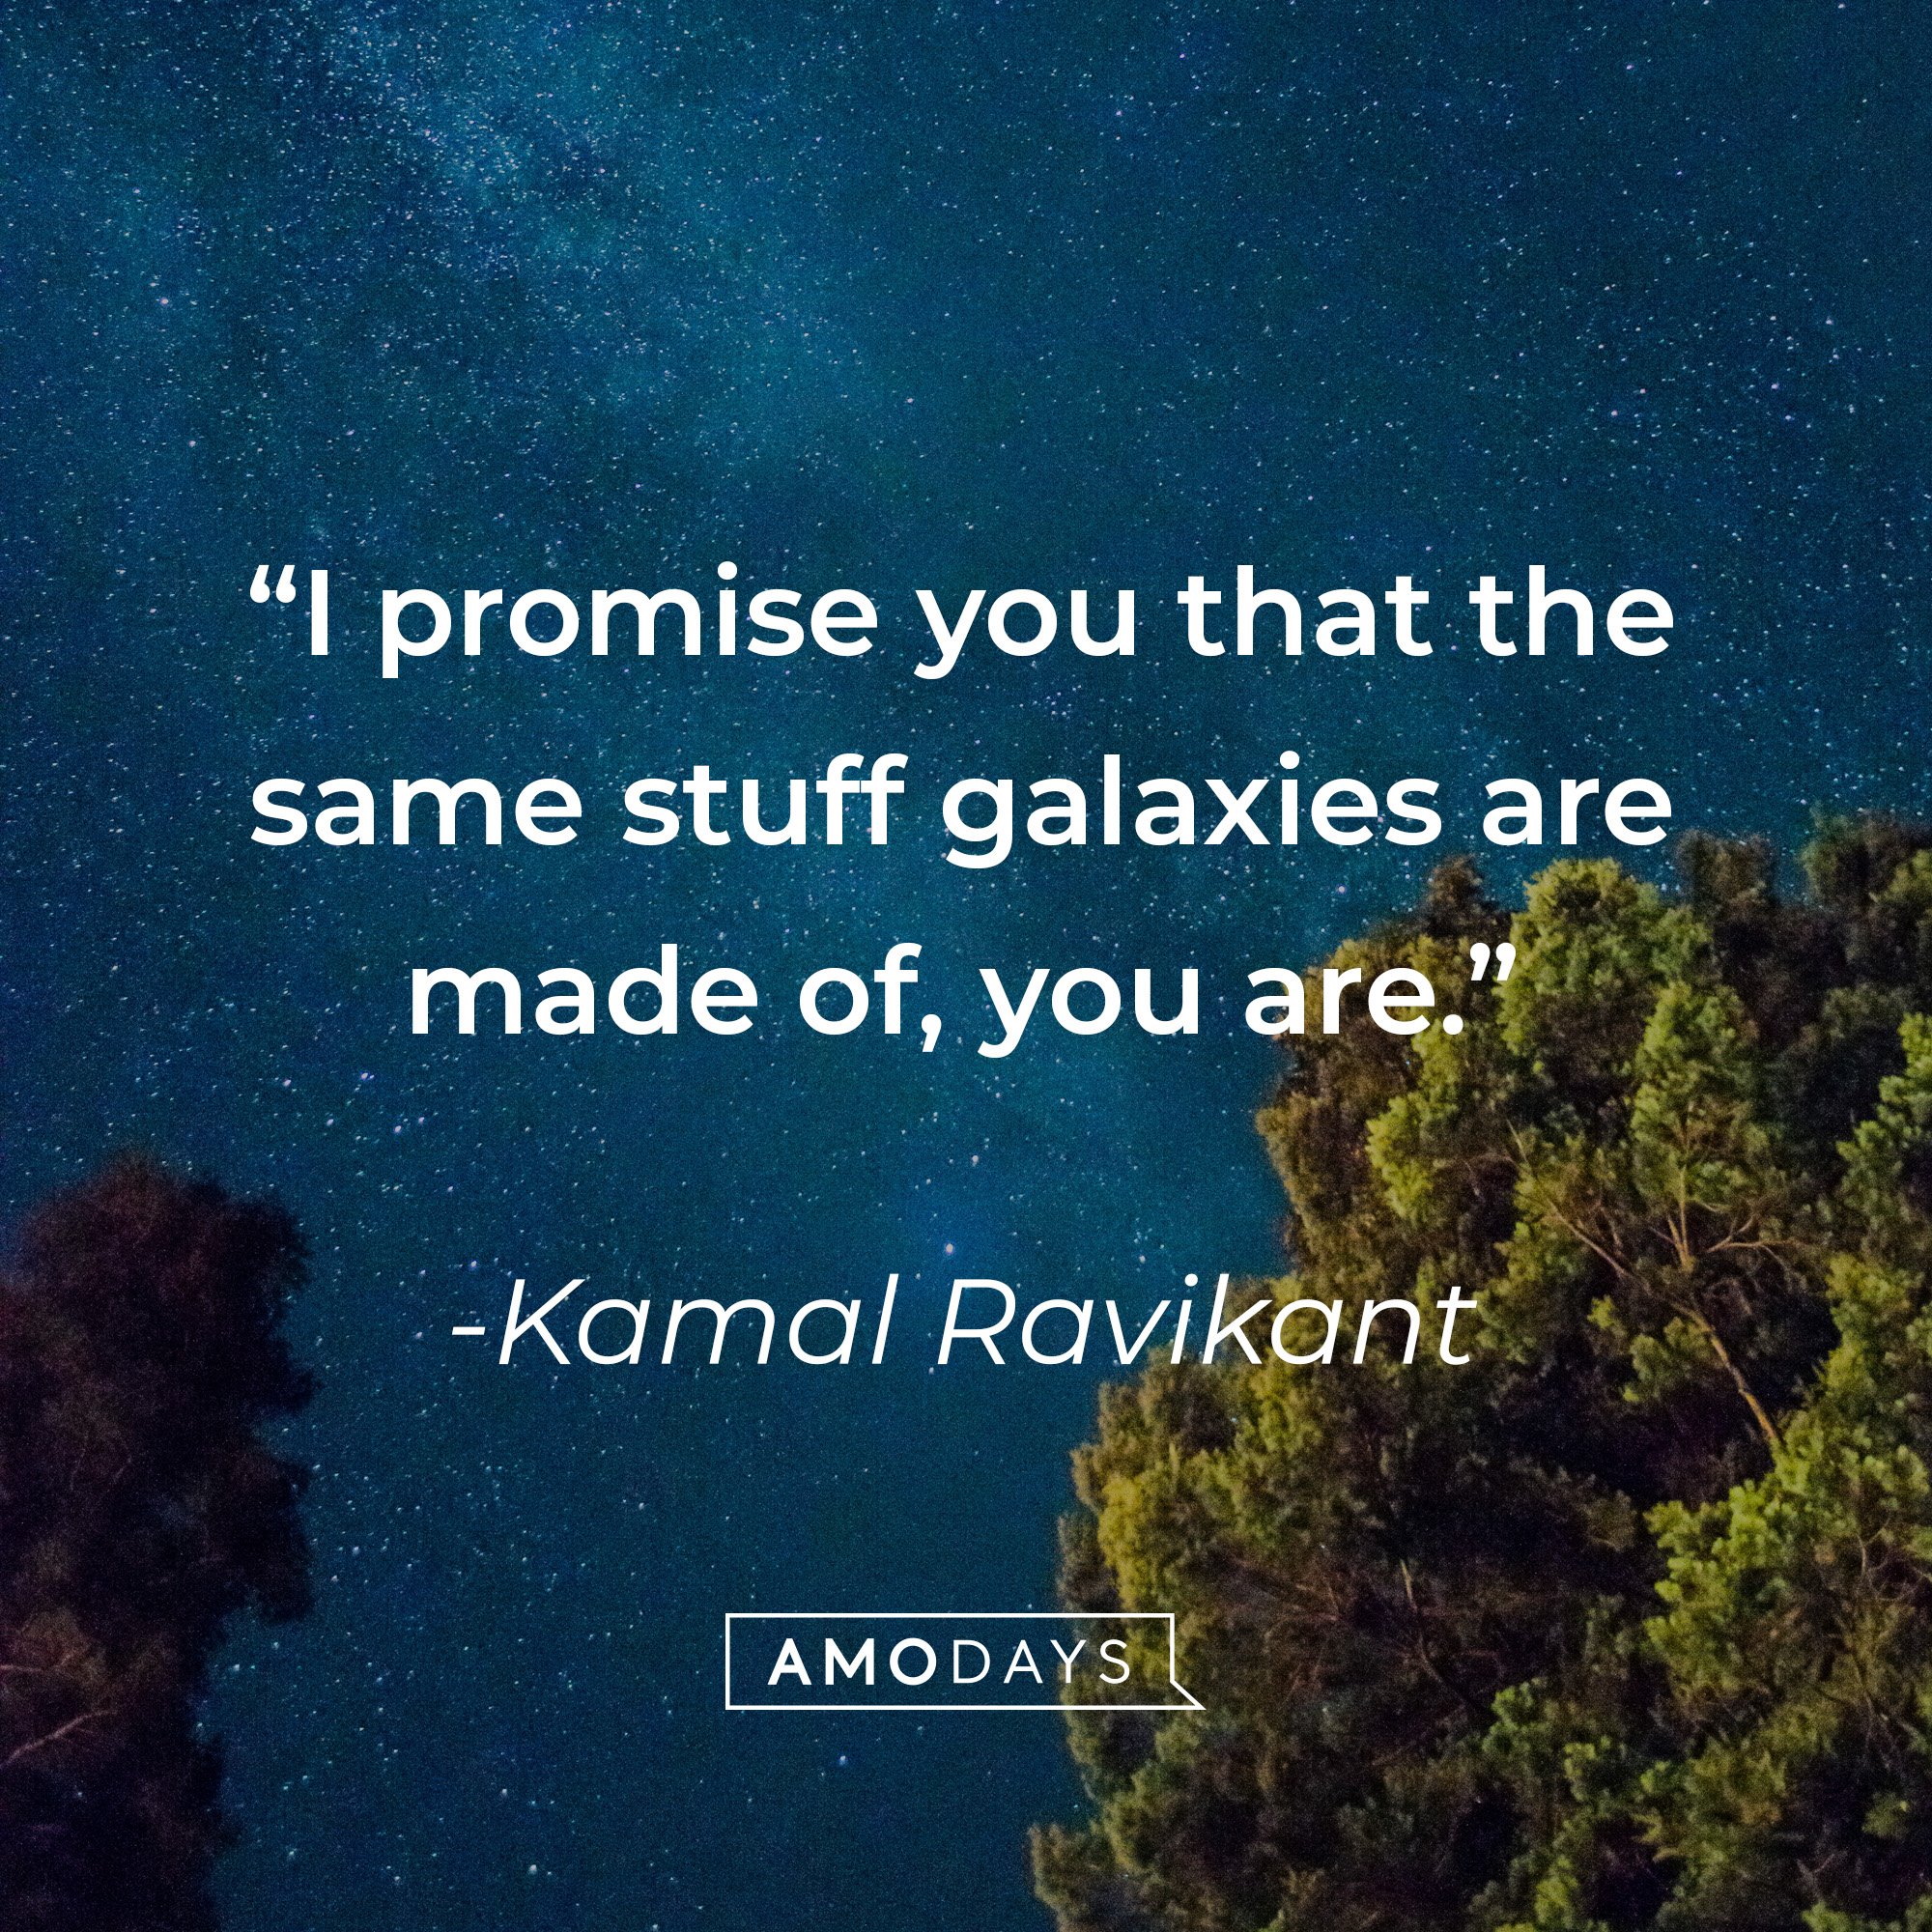 Kamal Ravikant’s quote: “I promise you that the same stuff galaxies are made of, you are.” | Image: AmoDays